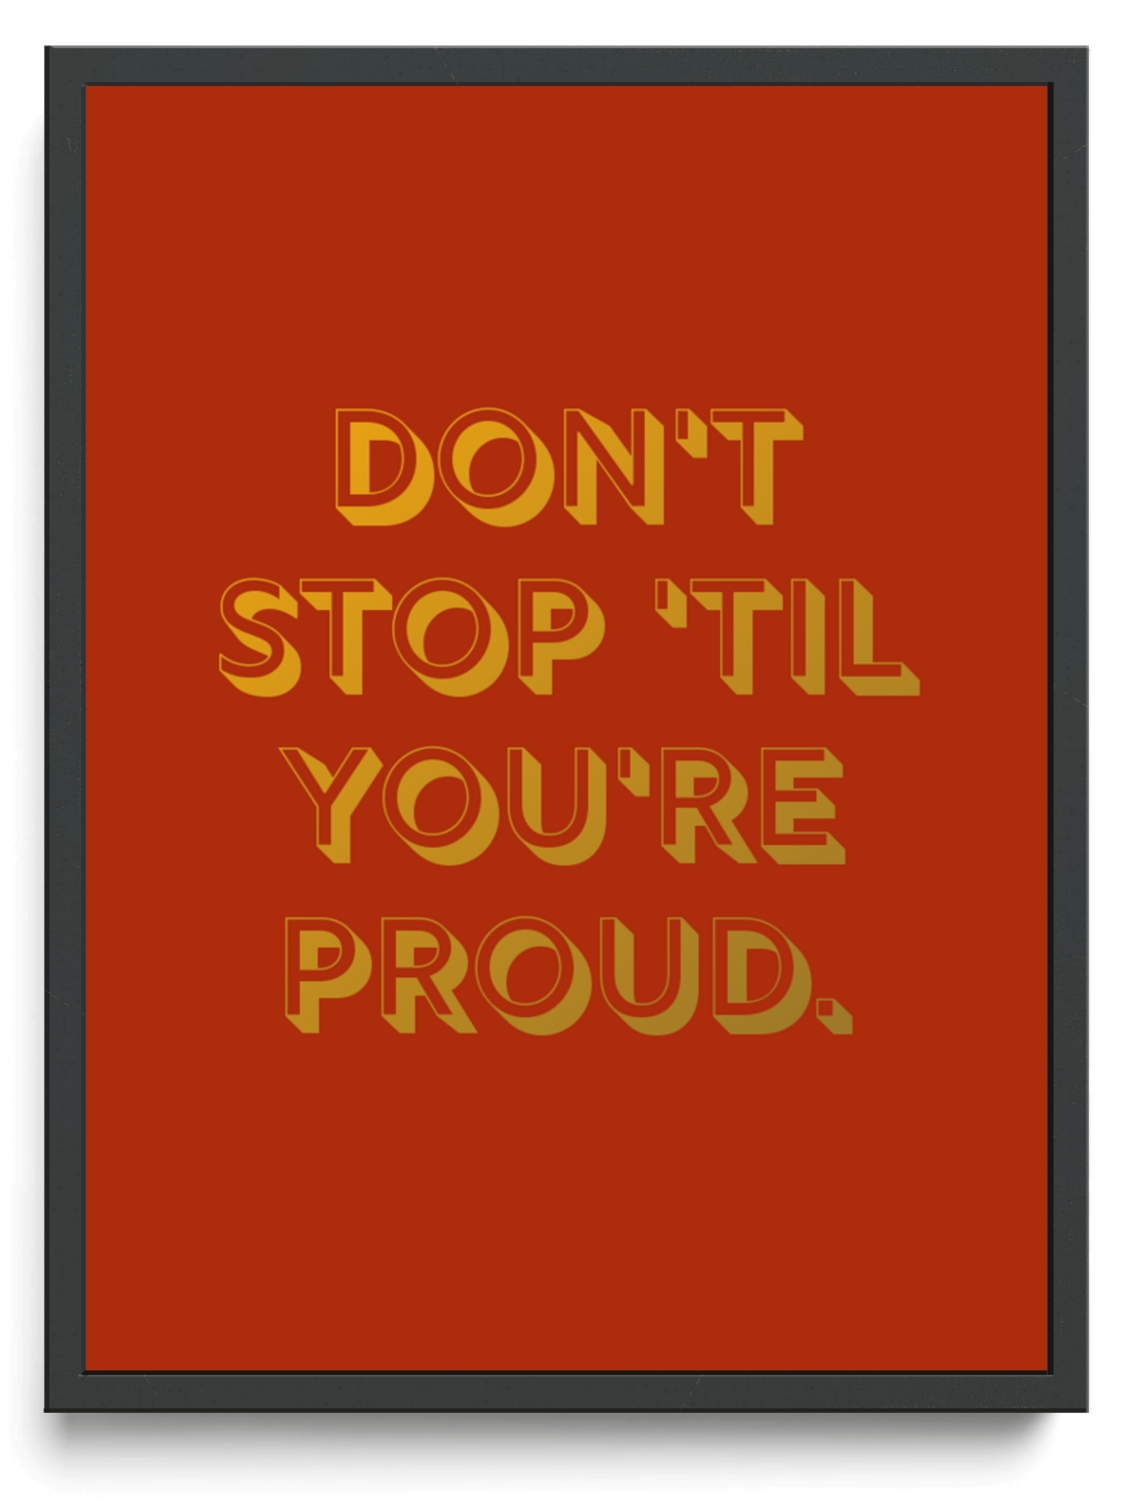 Dont stop til youre proud framed typographic print